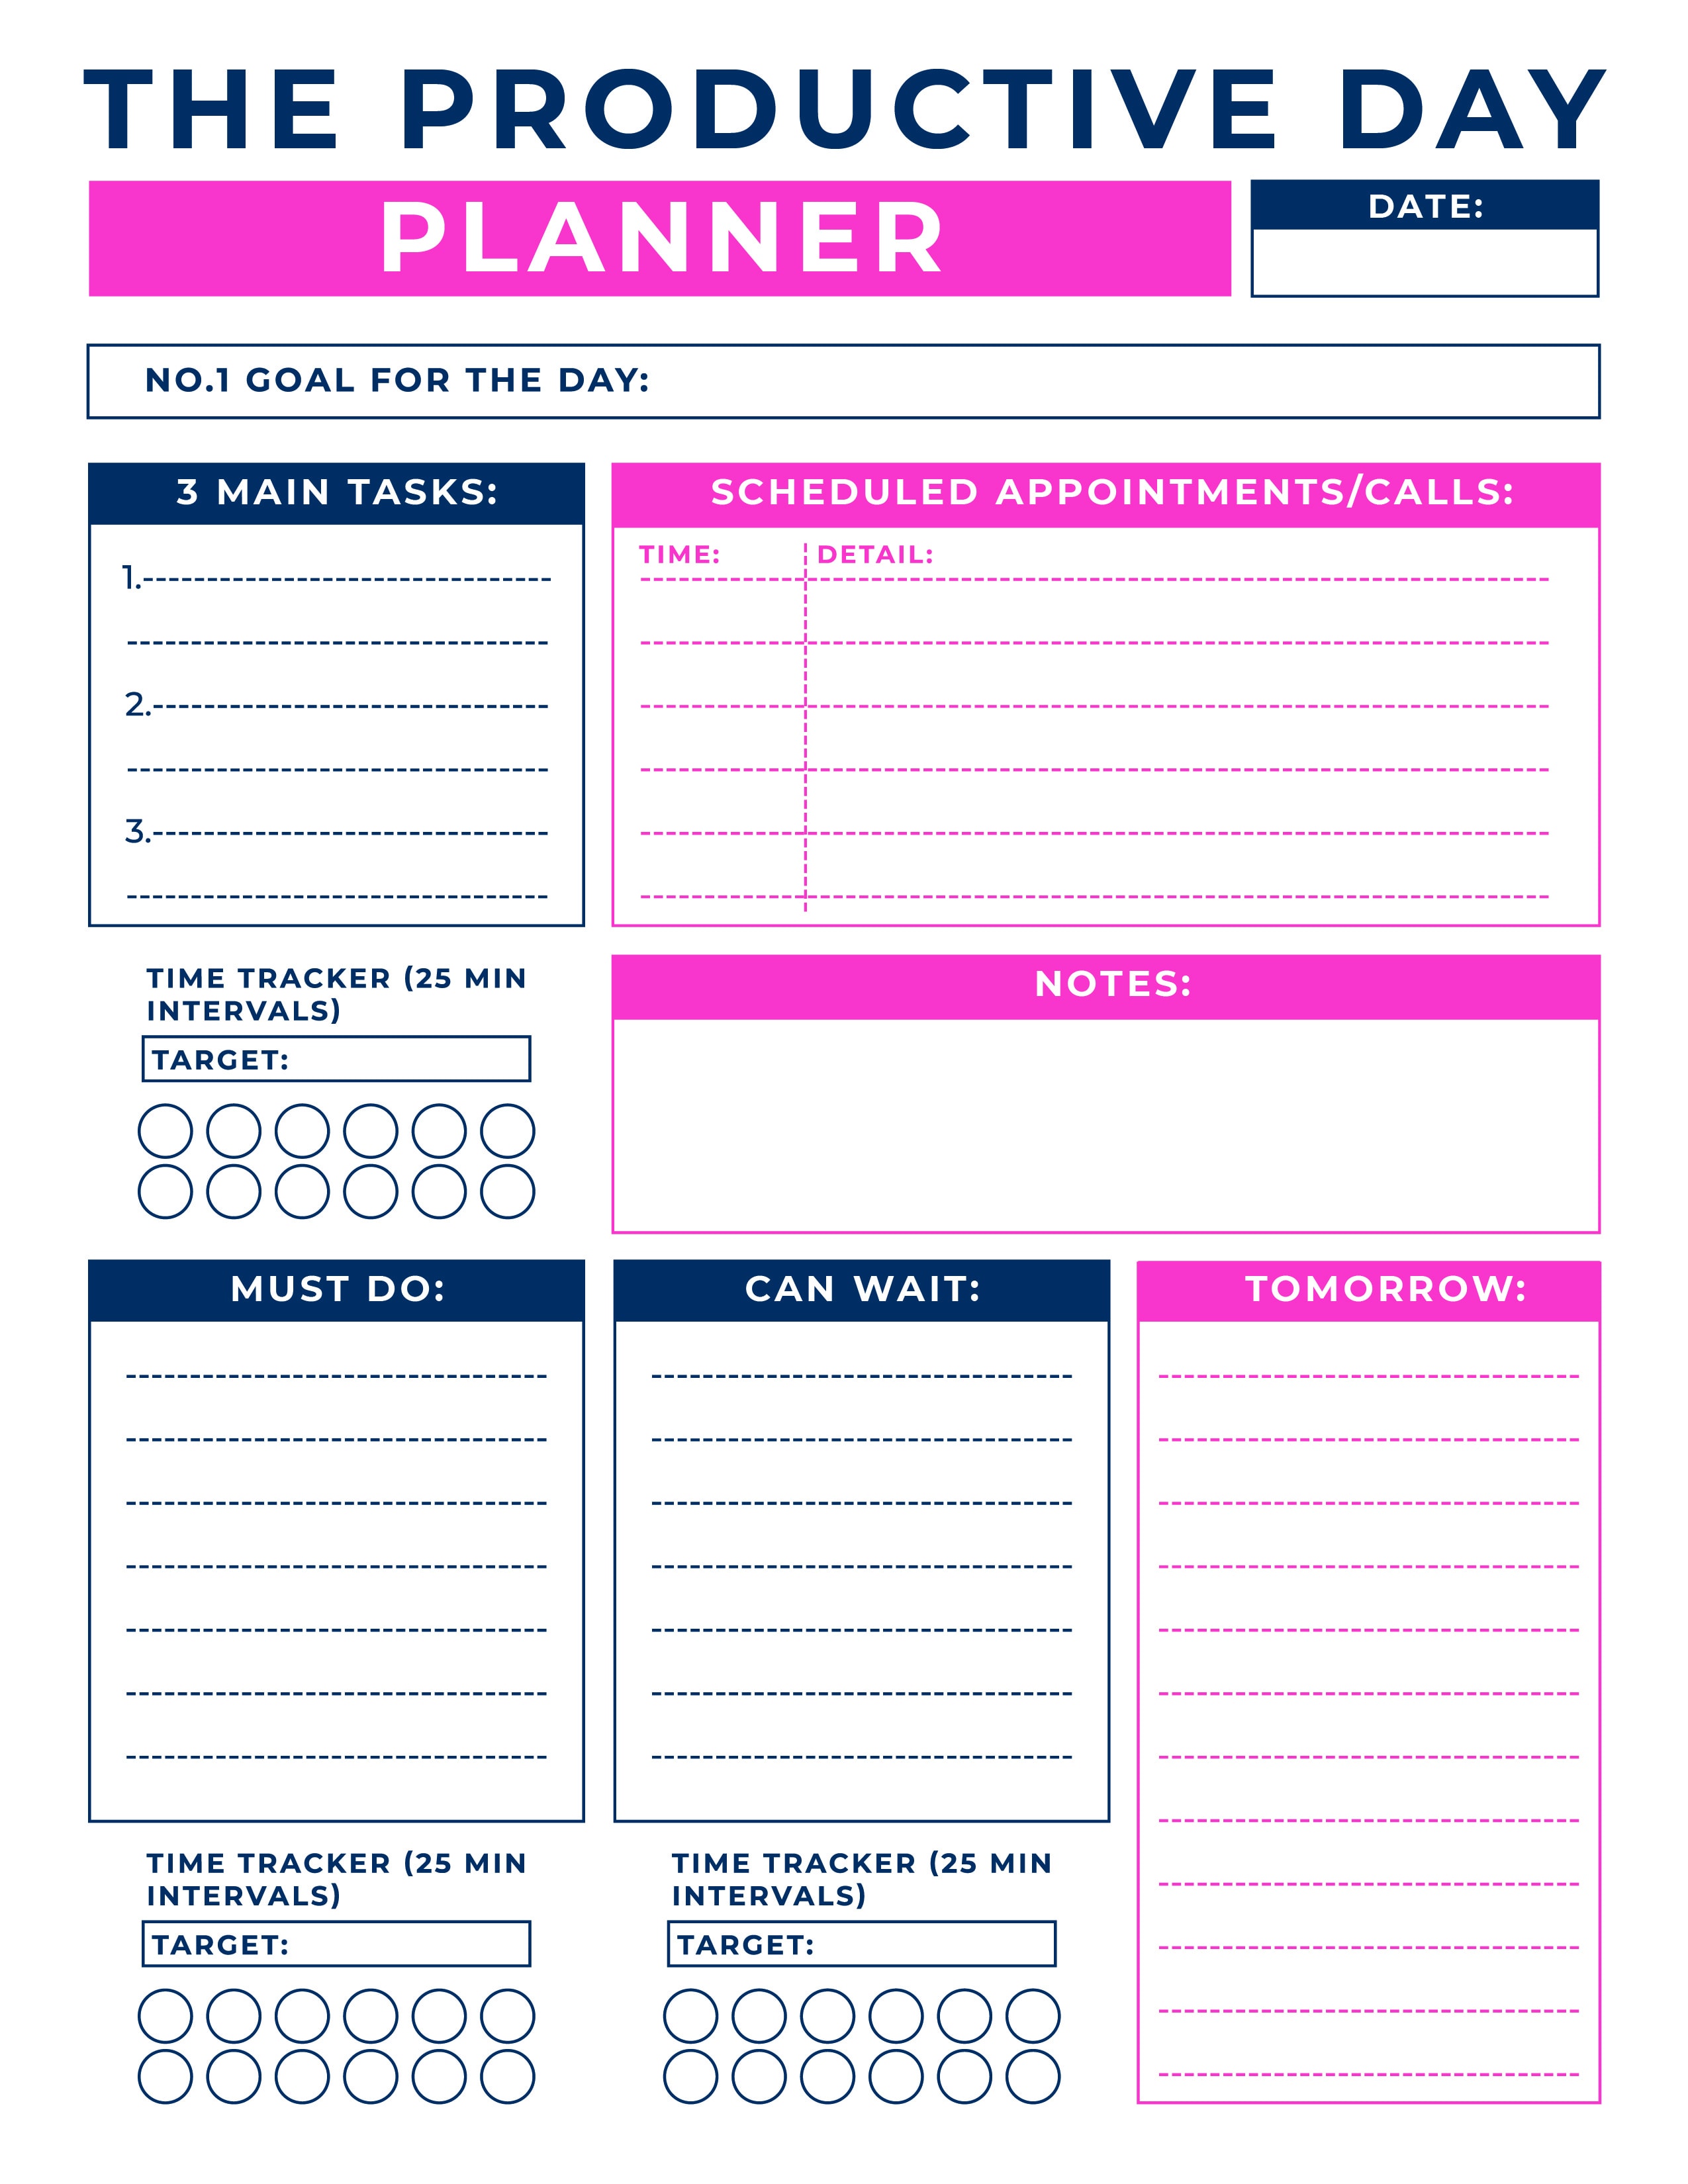 Today I've got a productivity planner and a 14 day challenge printable that will have you getting more things done in no time! You can use these sheets daily and get the motivation you need to complete all the tasks! It will help you to organize your life by setting goals and helping with time management. A super easy layout for business or daily life tasks. Grab your free printable download! #productivityplanner #productivity #taskmanager #stayorganized